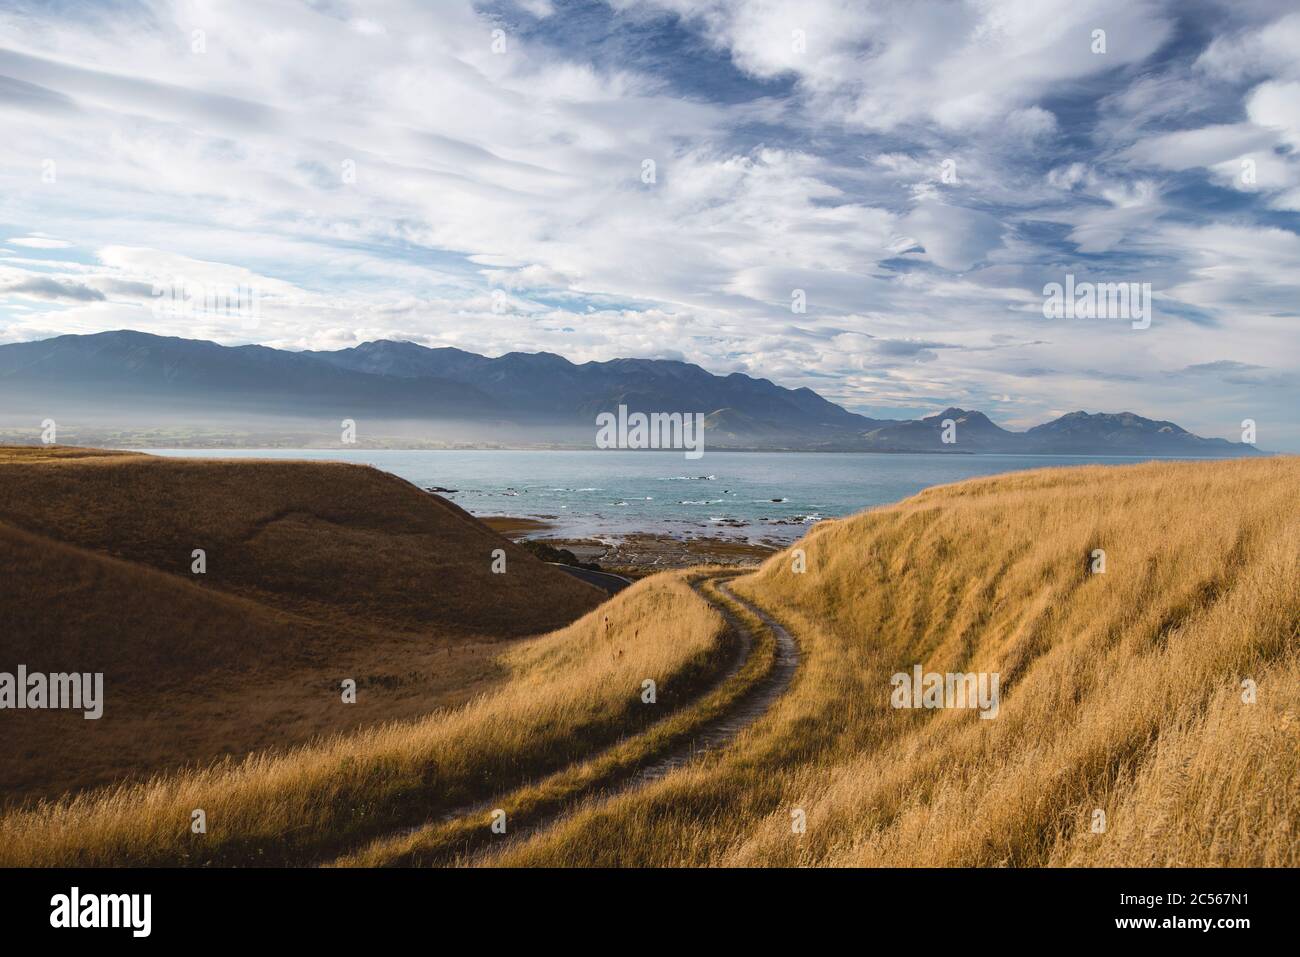 Lonely coastal road with a view of the mountains of Kaikoura, Canterbury, New Zealand Stock Photo